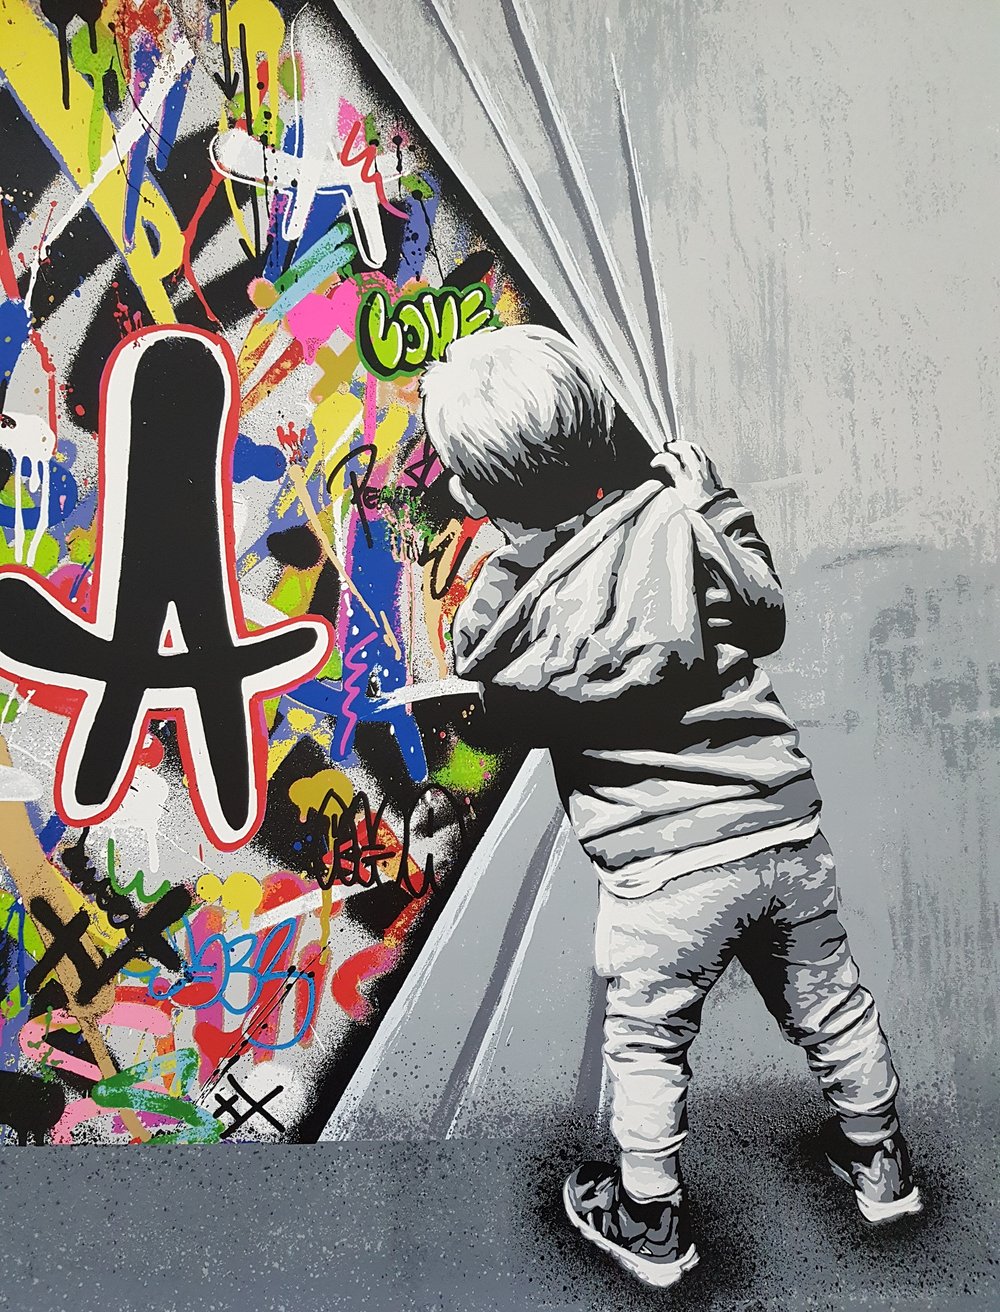 MARTIN WHATSON "BEYOND THE WALL"- 35 COLOUR PRINT EDITION OF 250 - 100CM X 71CM